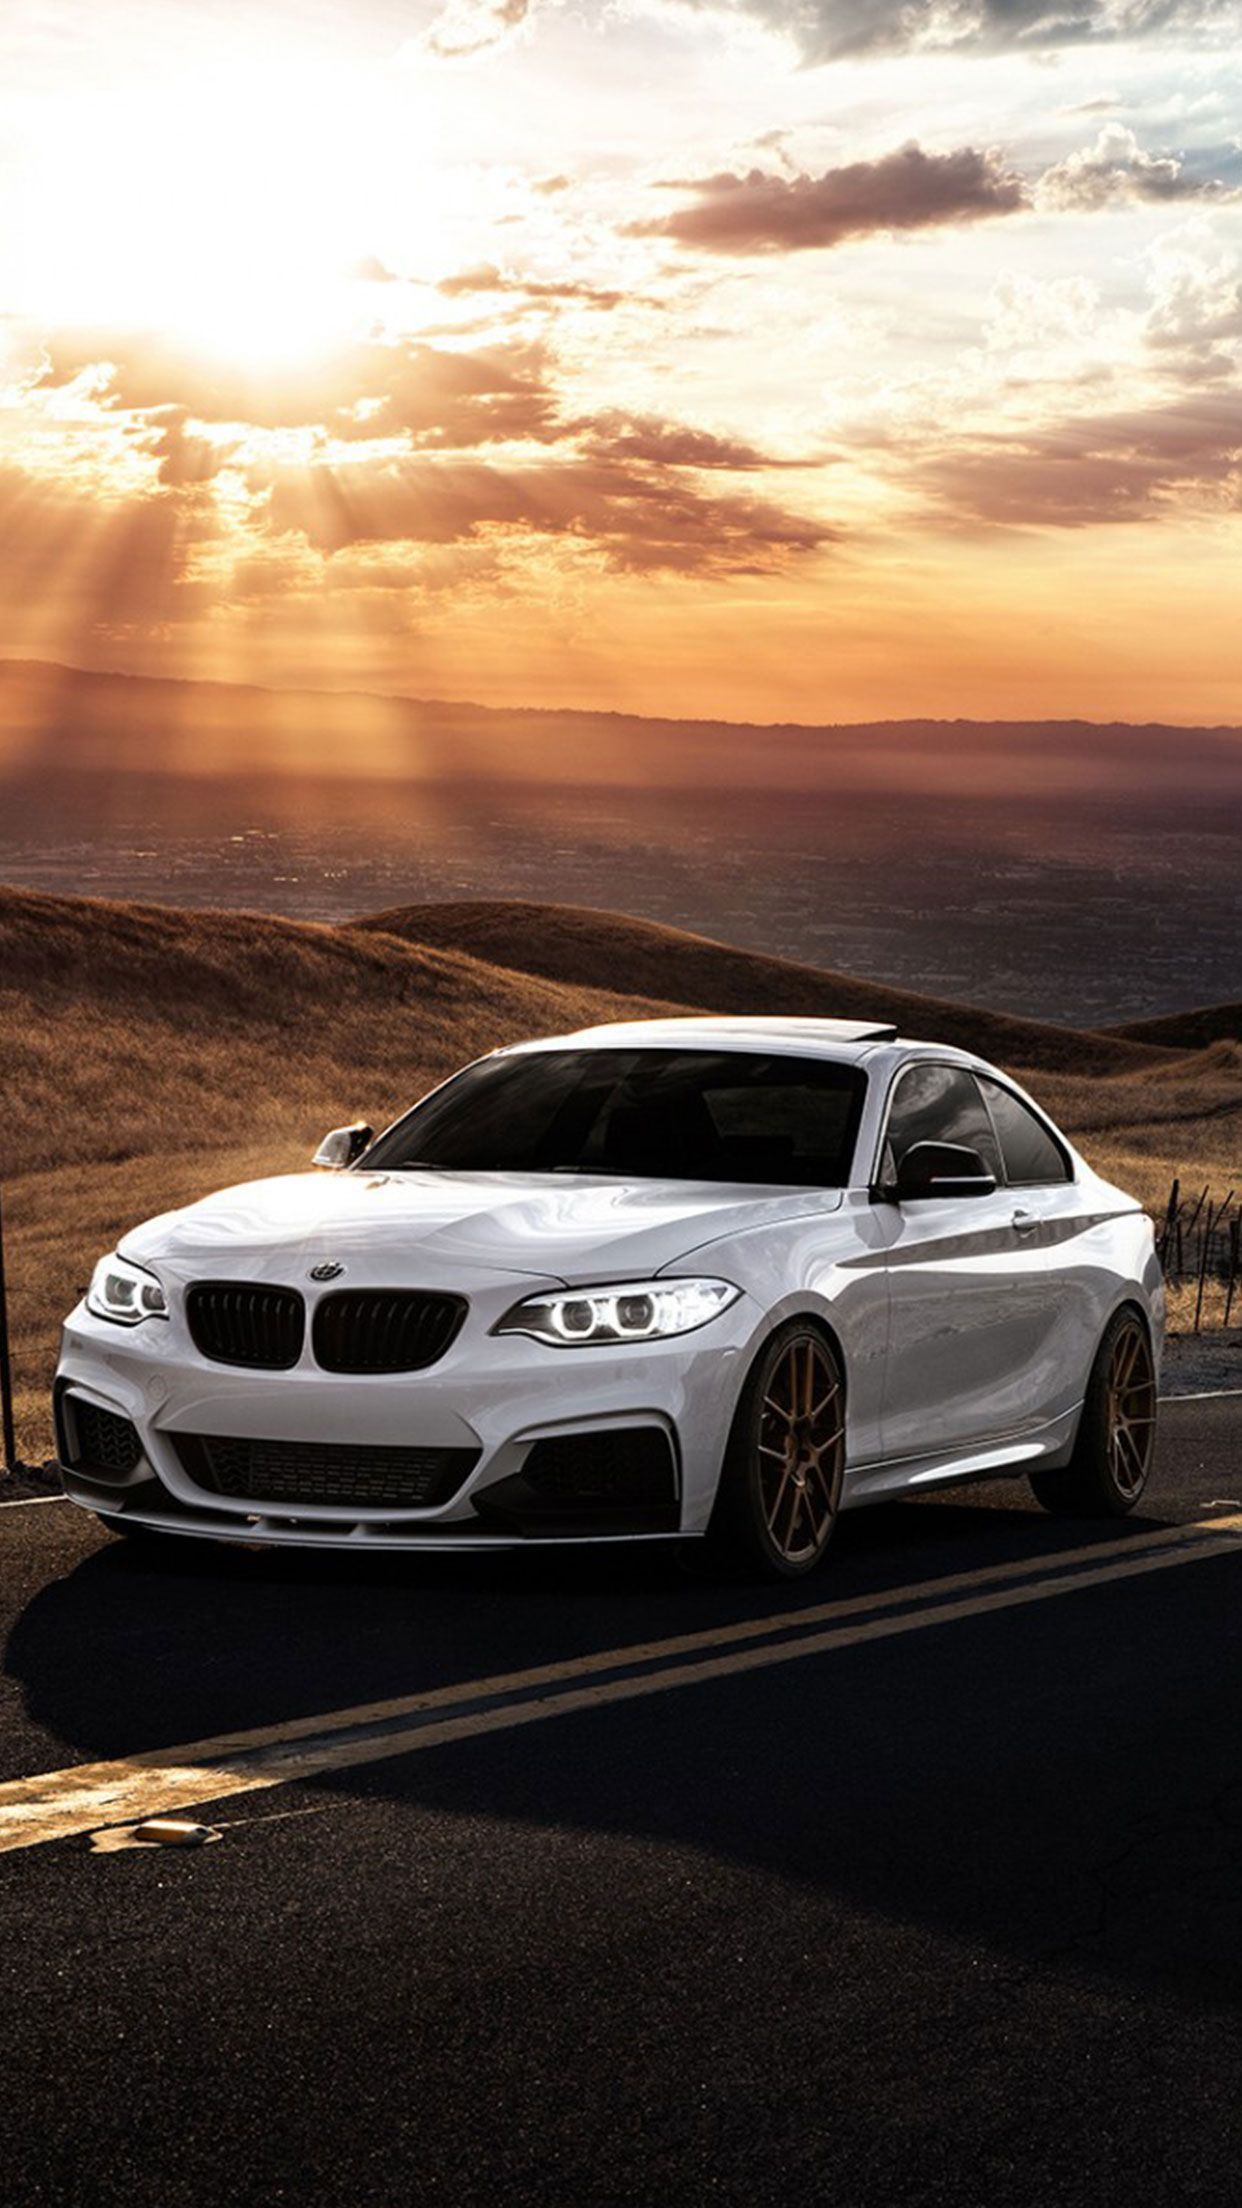 BMW 2 series in the sunset - BMW